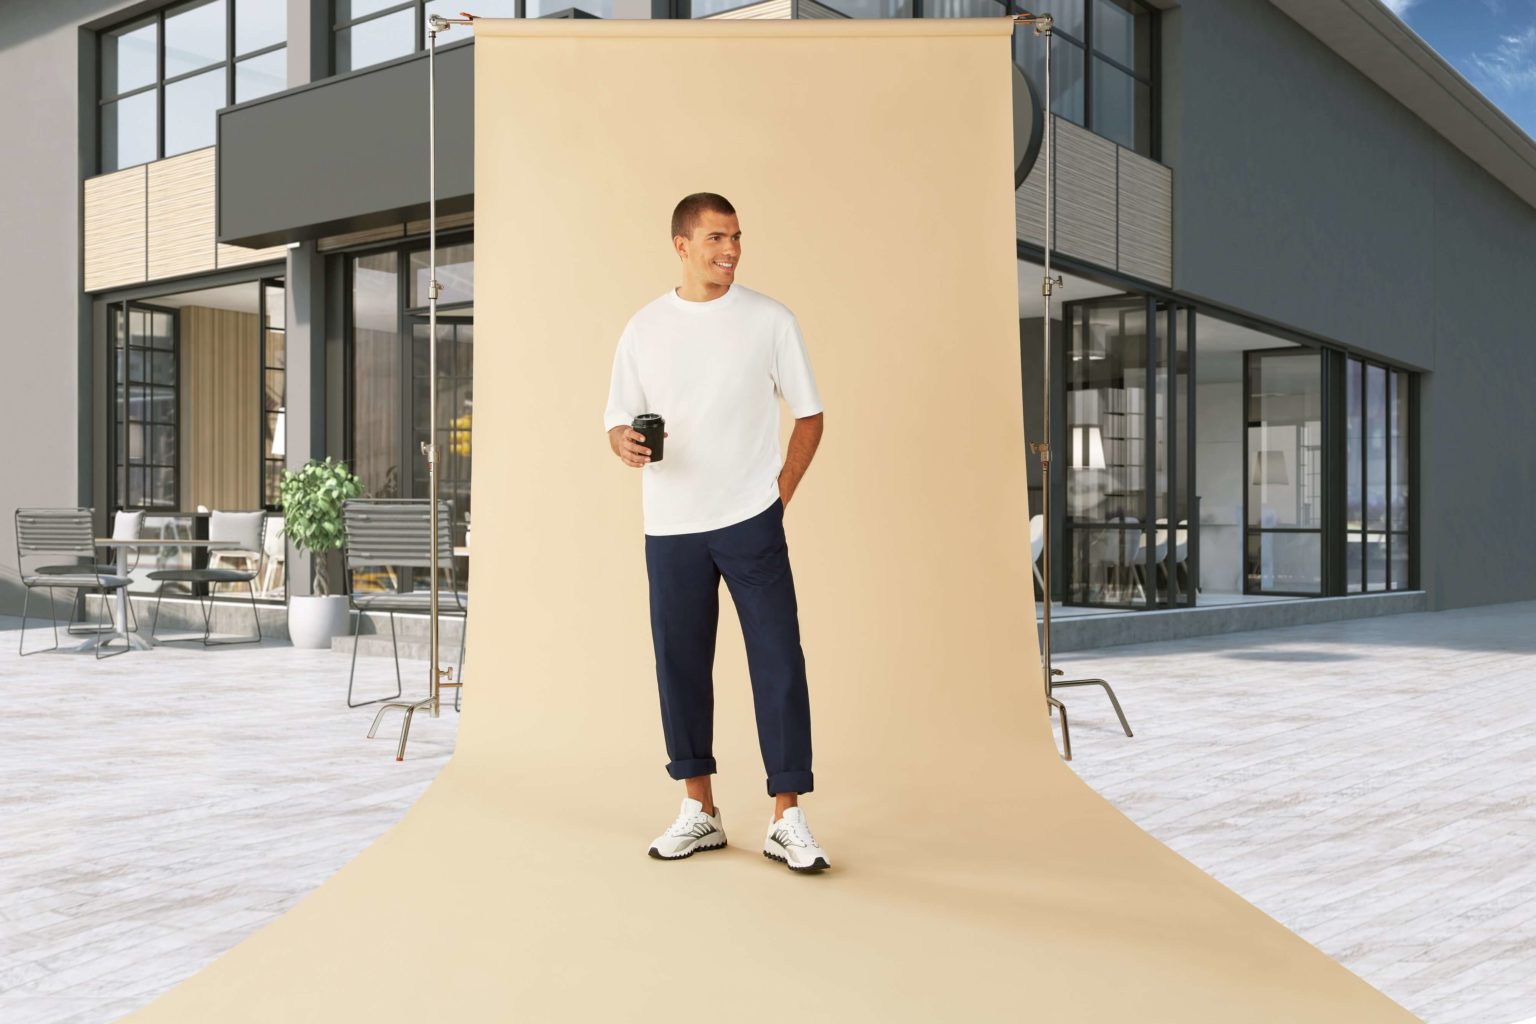 A male model in a leisure attire with a coffee holder and a building background setup for photography